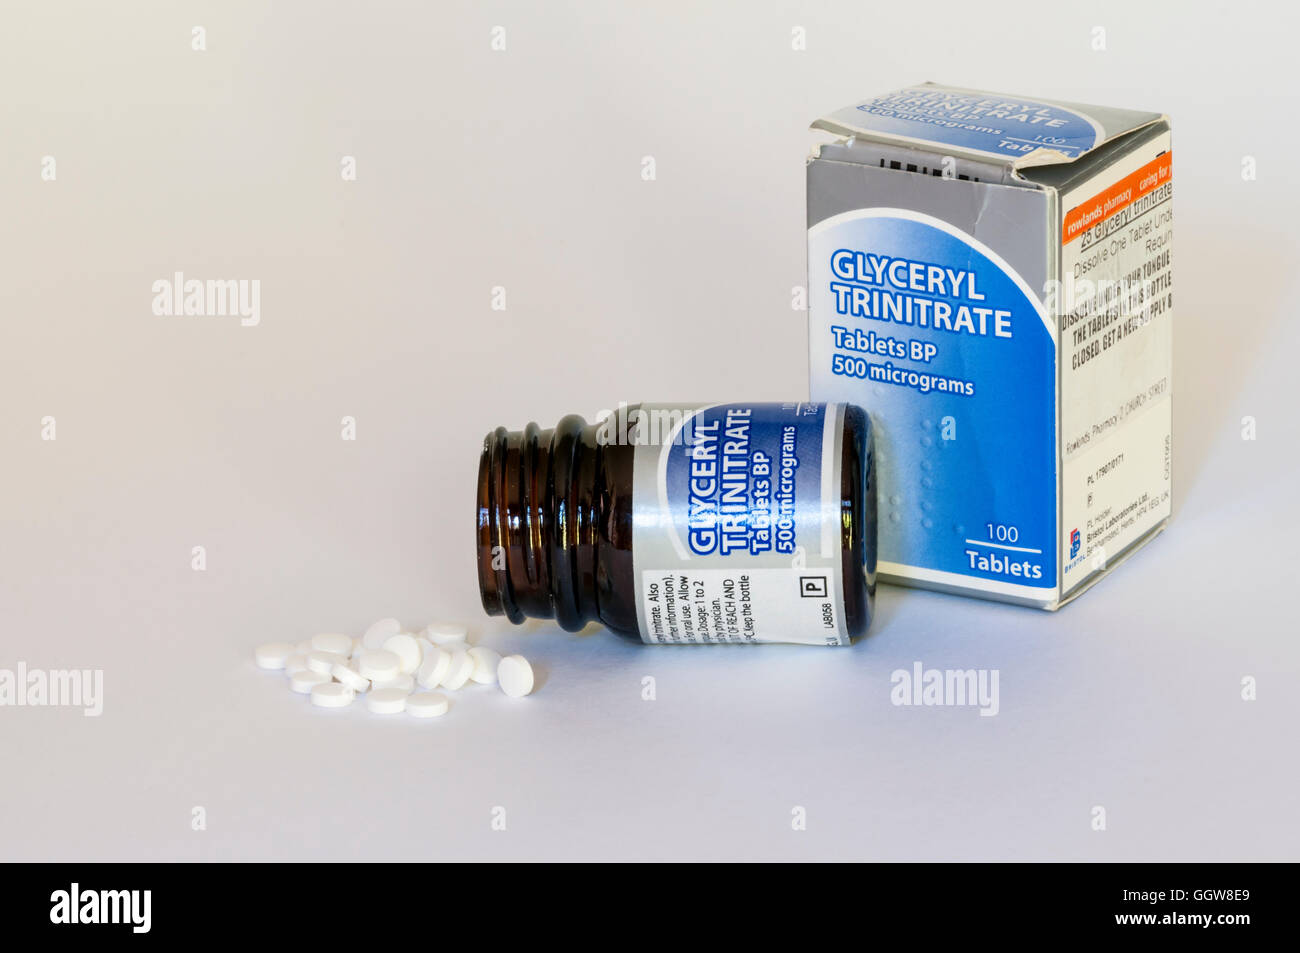 Glyceryl Trinitrate pills used in the treatment of the symptoms of heart disease such as Angina. Stock Photo